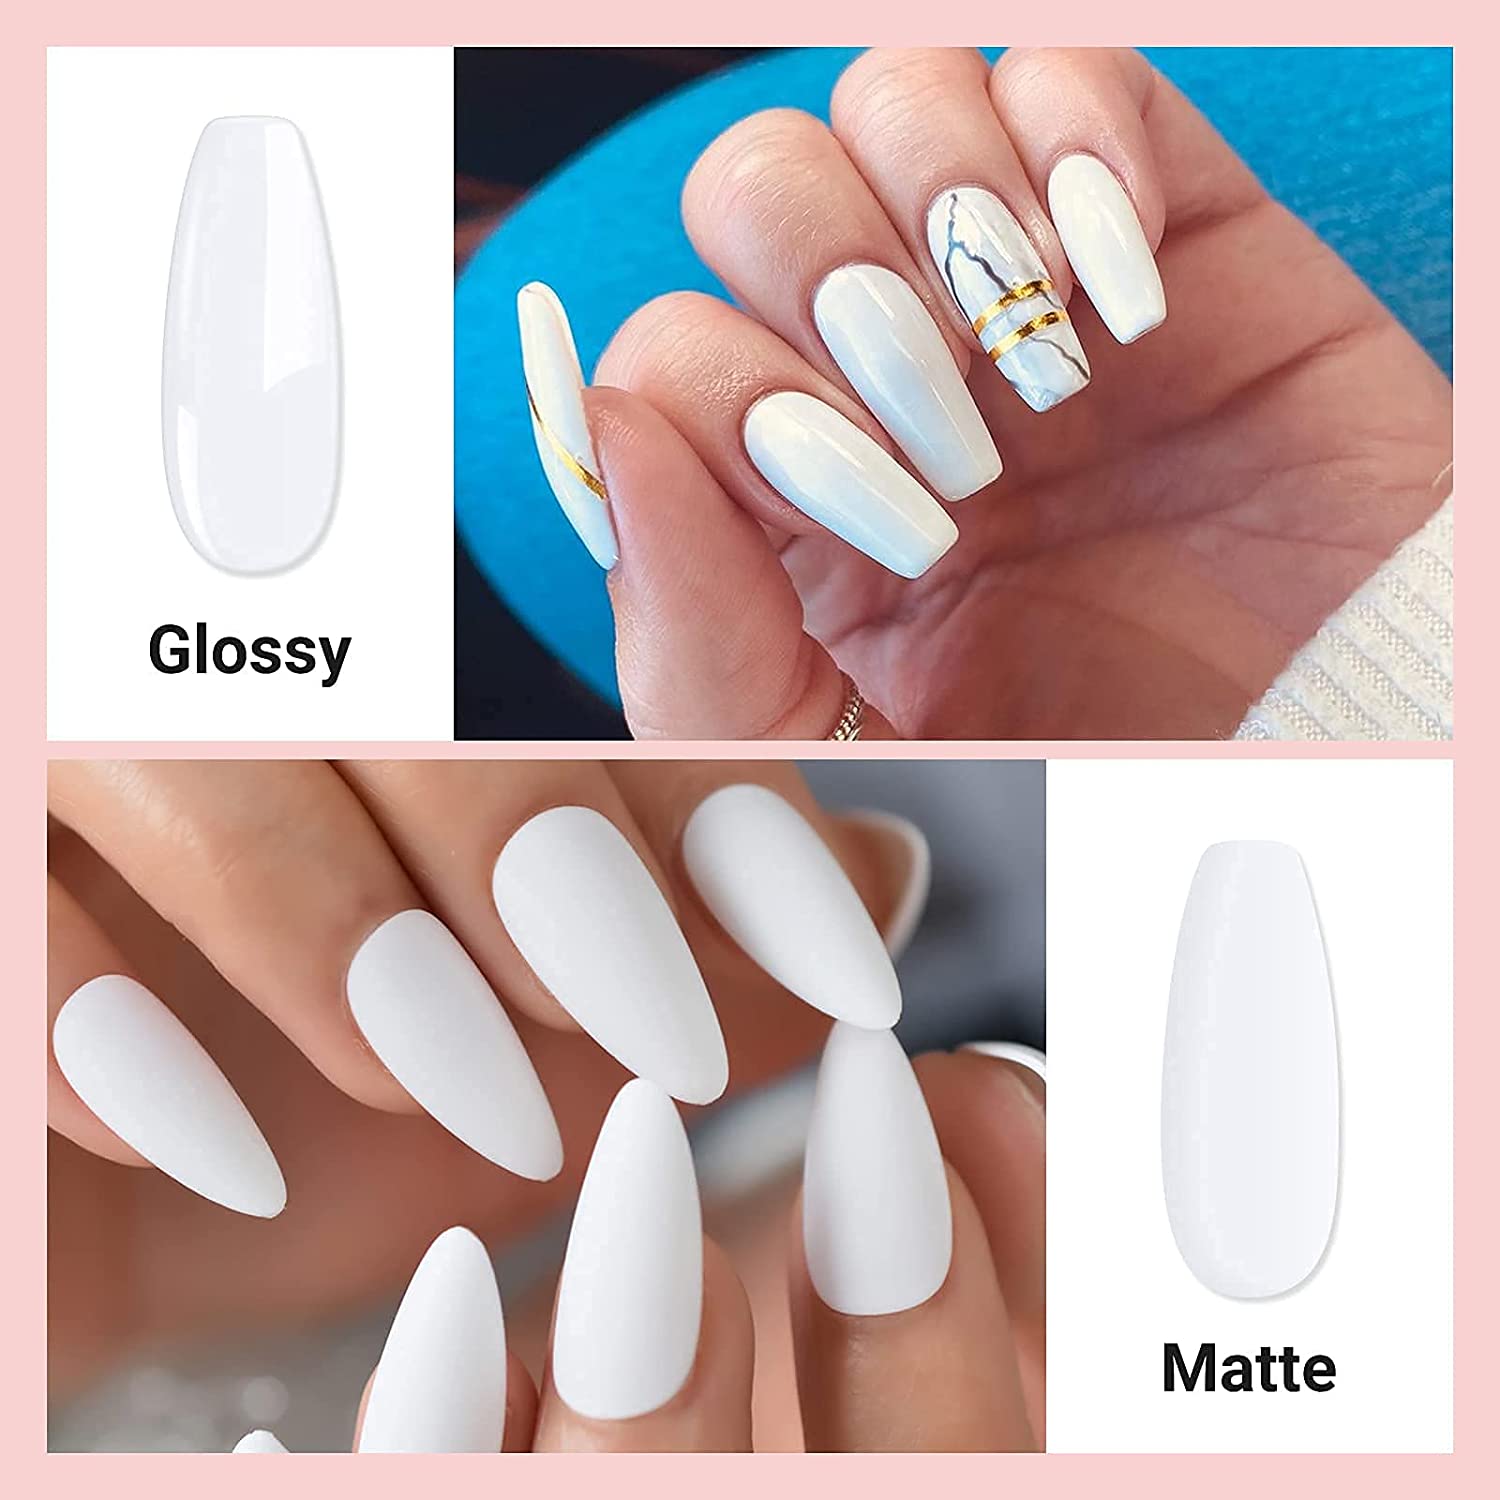 Handmade- Solid Neutral Tone Colors- Matte or Glossy- Pick One Color! |  Solid color nails, One color nails, Glue on nails